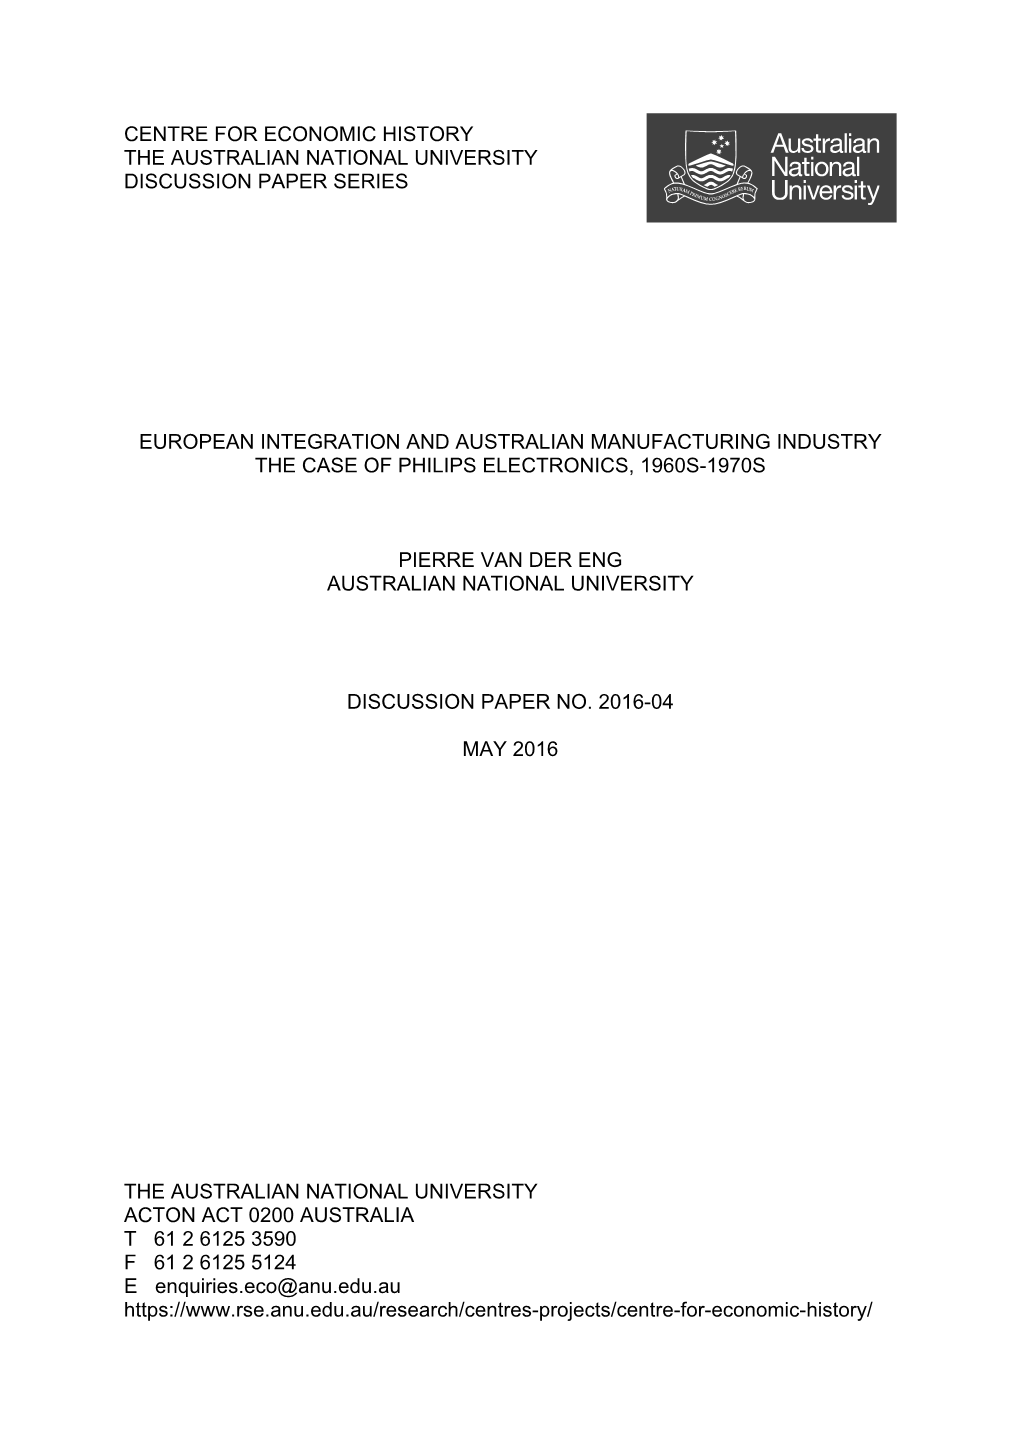 Centre for Economic History the Australian National University Discussion Paper Series